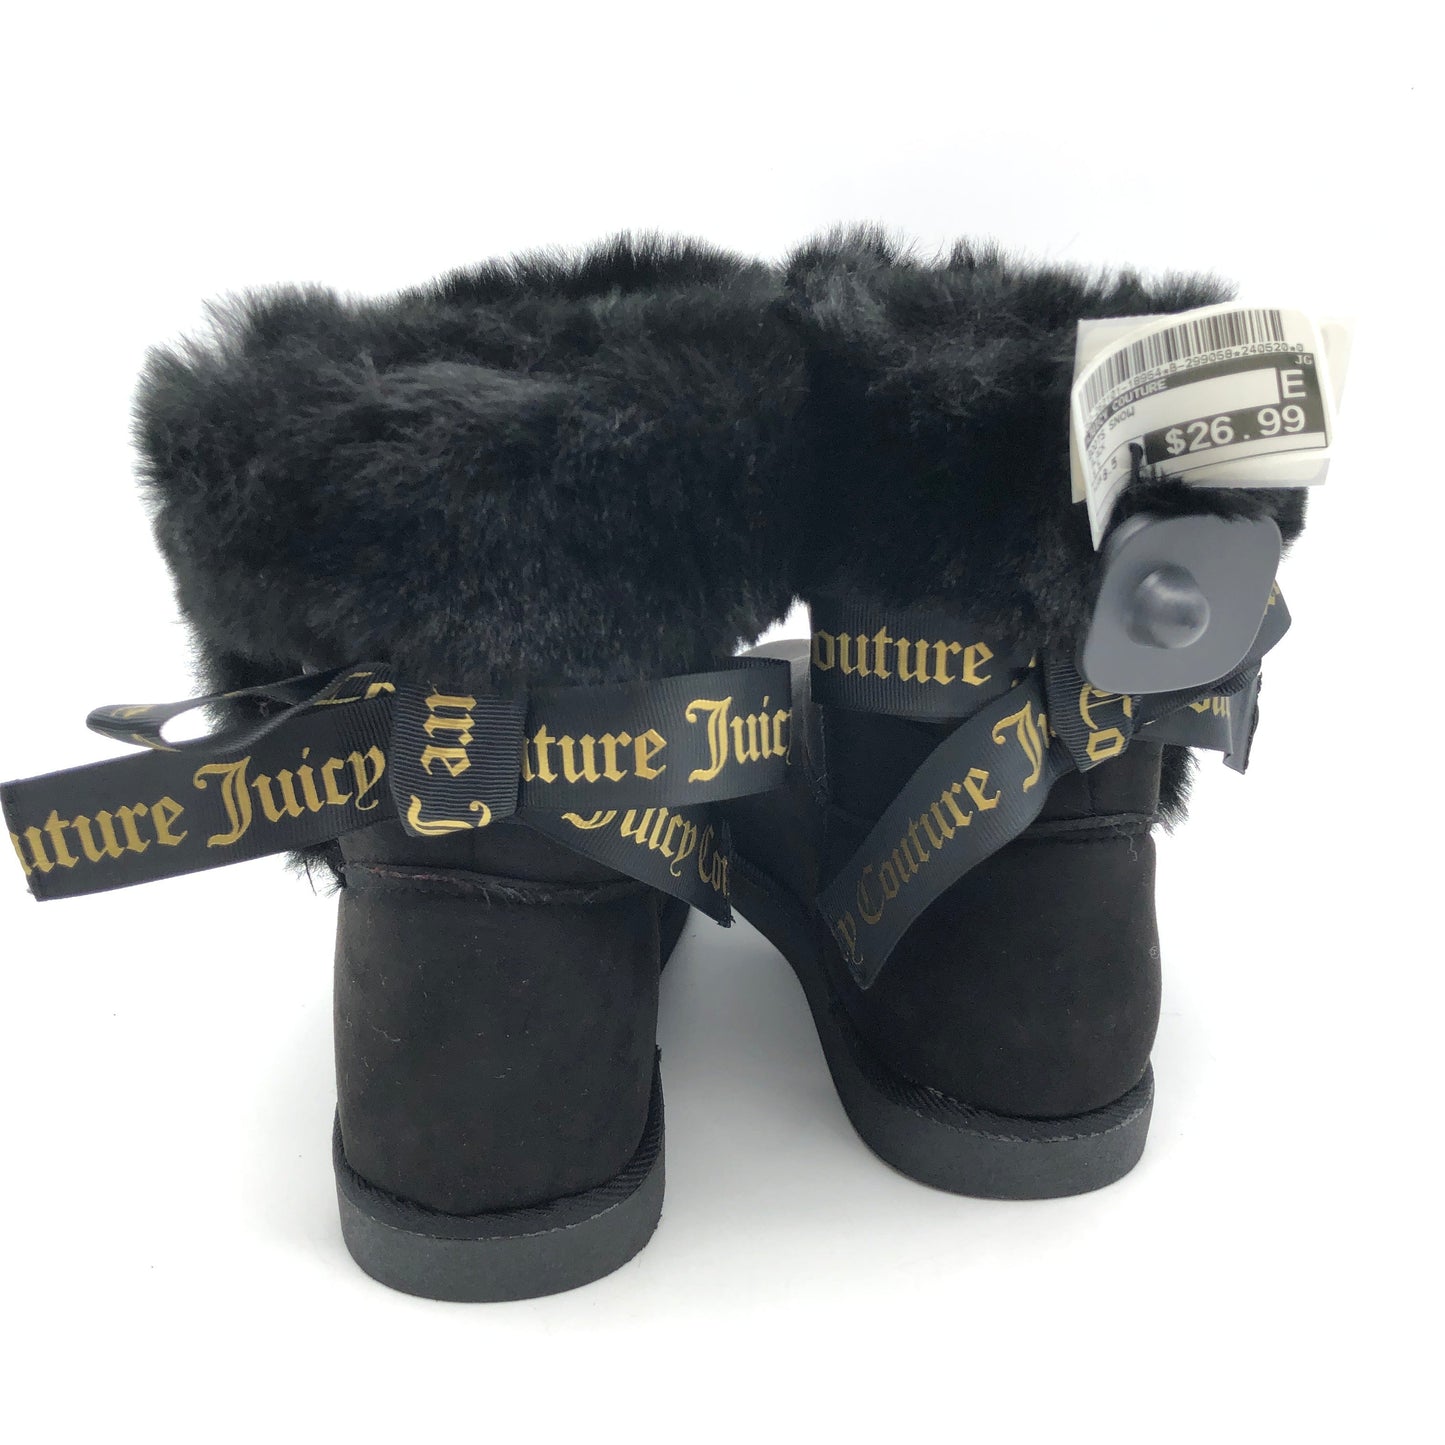 Boots Snow By Juicy Couture  Size: 8.5